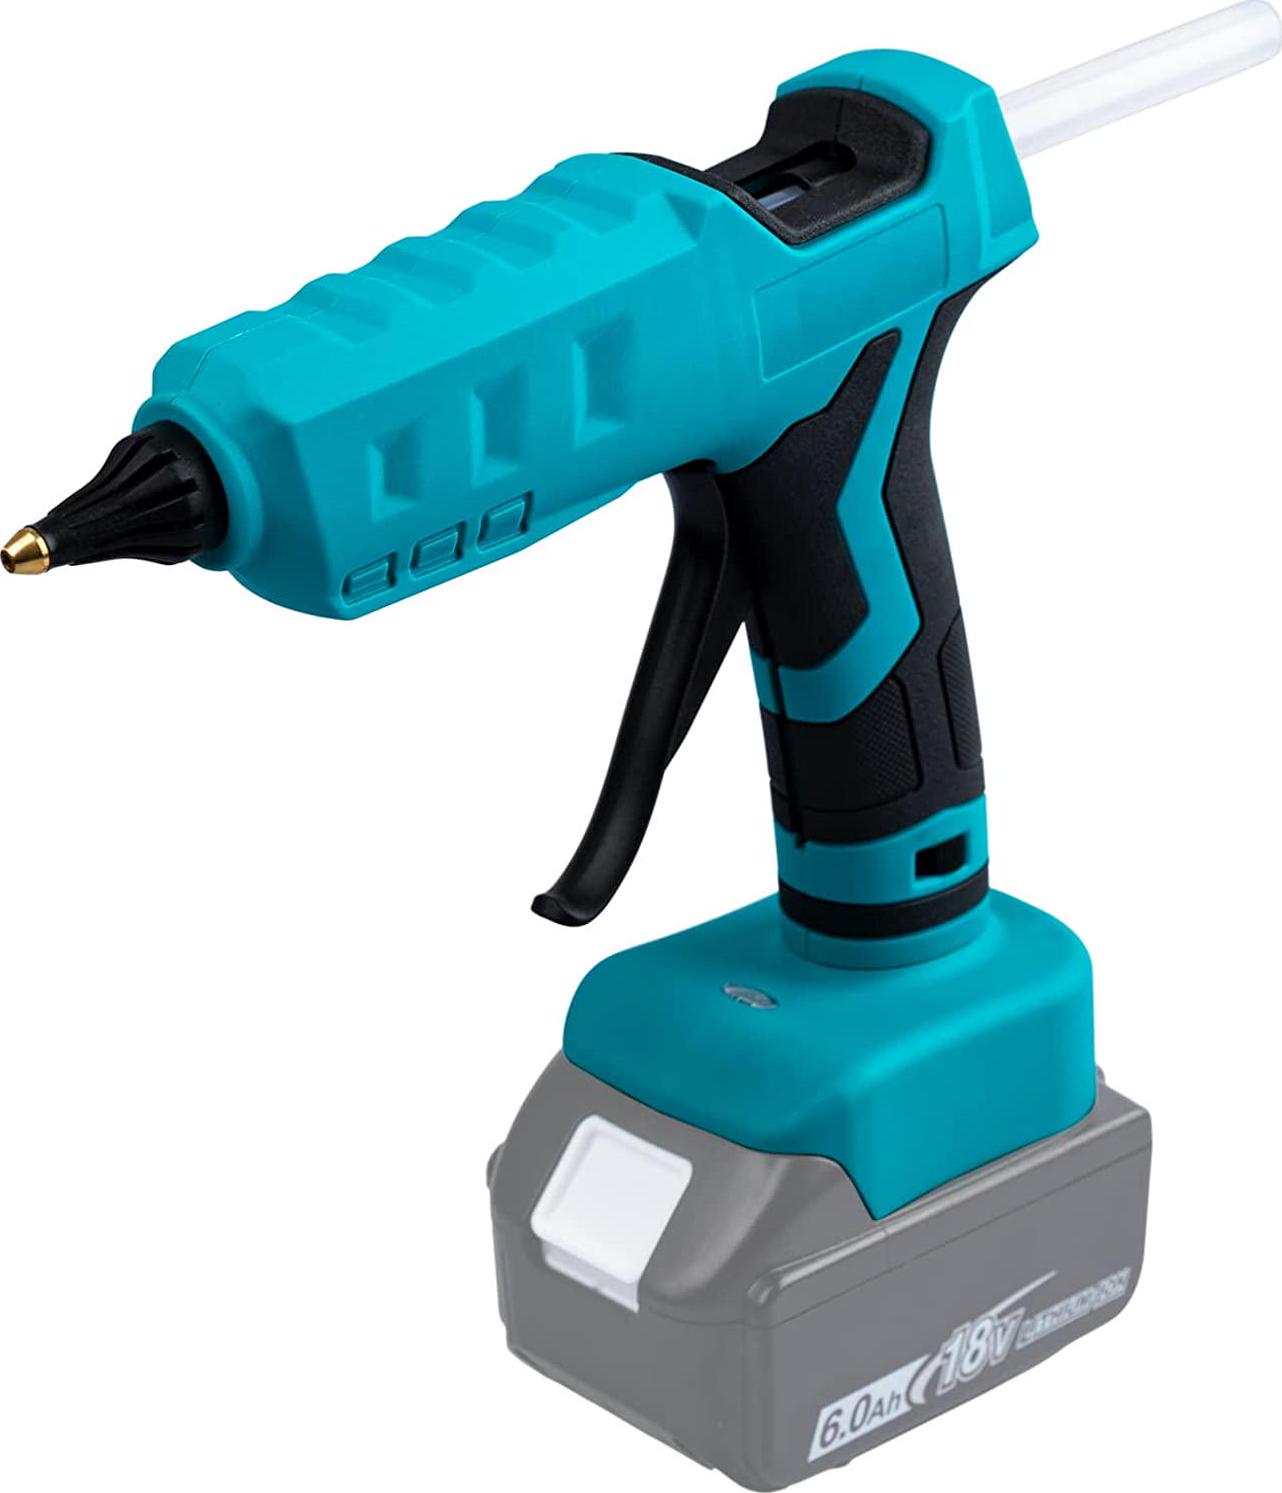 Mellif, Mellif Cordless Hot Glue Gun for Makita 18V Battery, Handheld Electric Power Glue Gun Full Size for Arts and Crafts and DIY with 20 Glue Sticks (Battery Not Included)